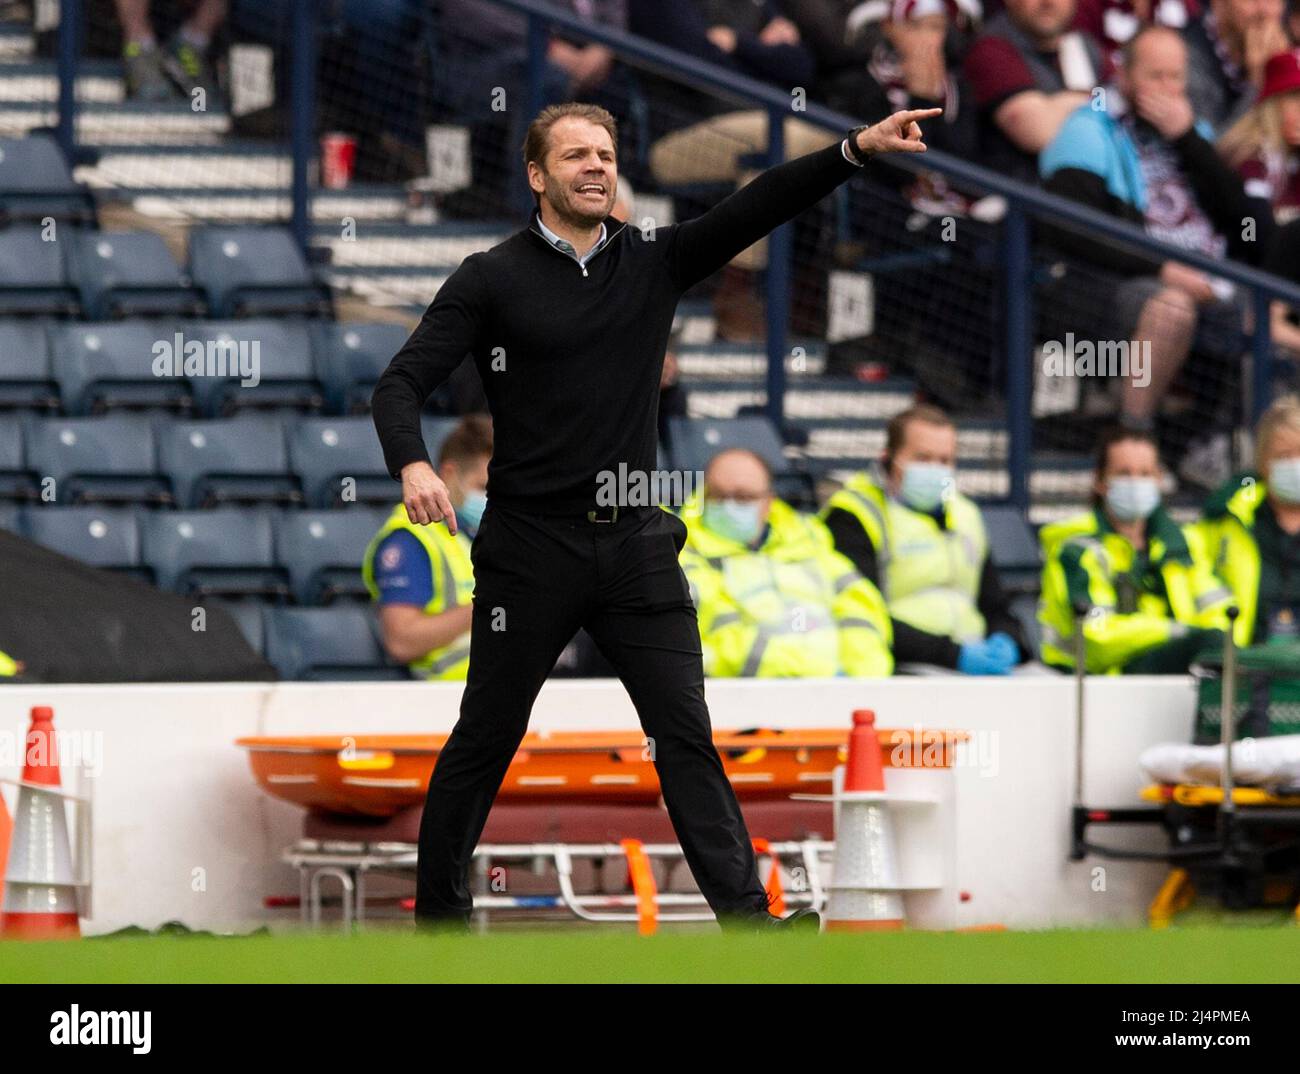 Glasgow, UK. 07th Apr, 2022. Scottish Cup semi final - Heart of Midlothian FC v Hibernian FC 07/04/2022 Pic shows: Hearts' manager, Robbie Neilson shouts instructions to his team as Hearts take on Hibs in the Scottish Cup semi final at Hampden Park, Glasgow Credit: Ian Jacobs/Alamy Live News Stock Photo